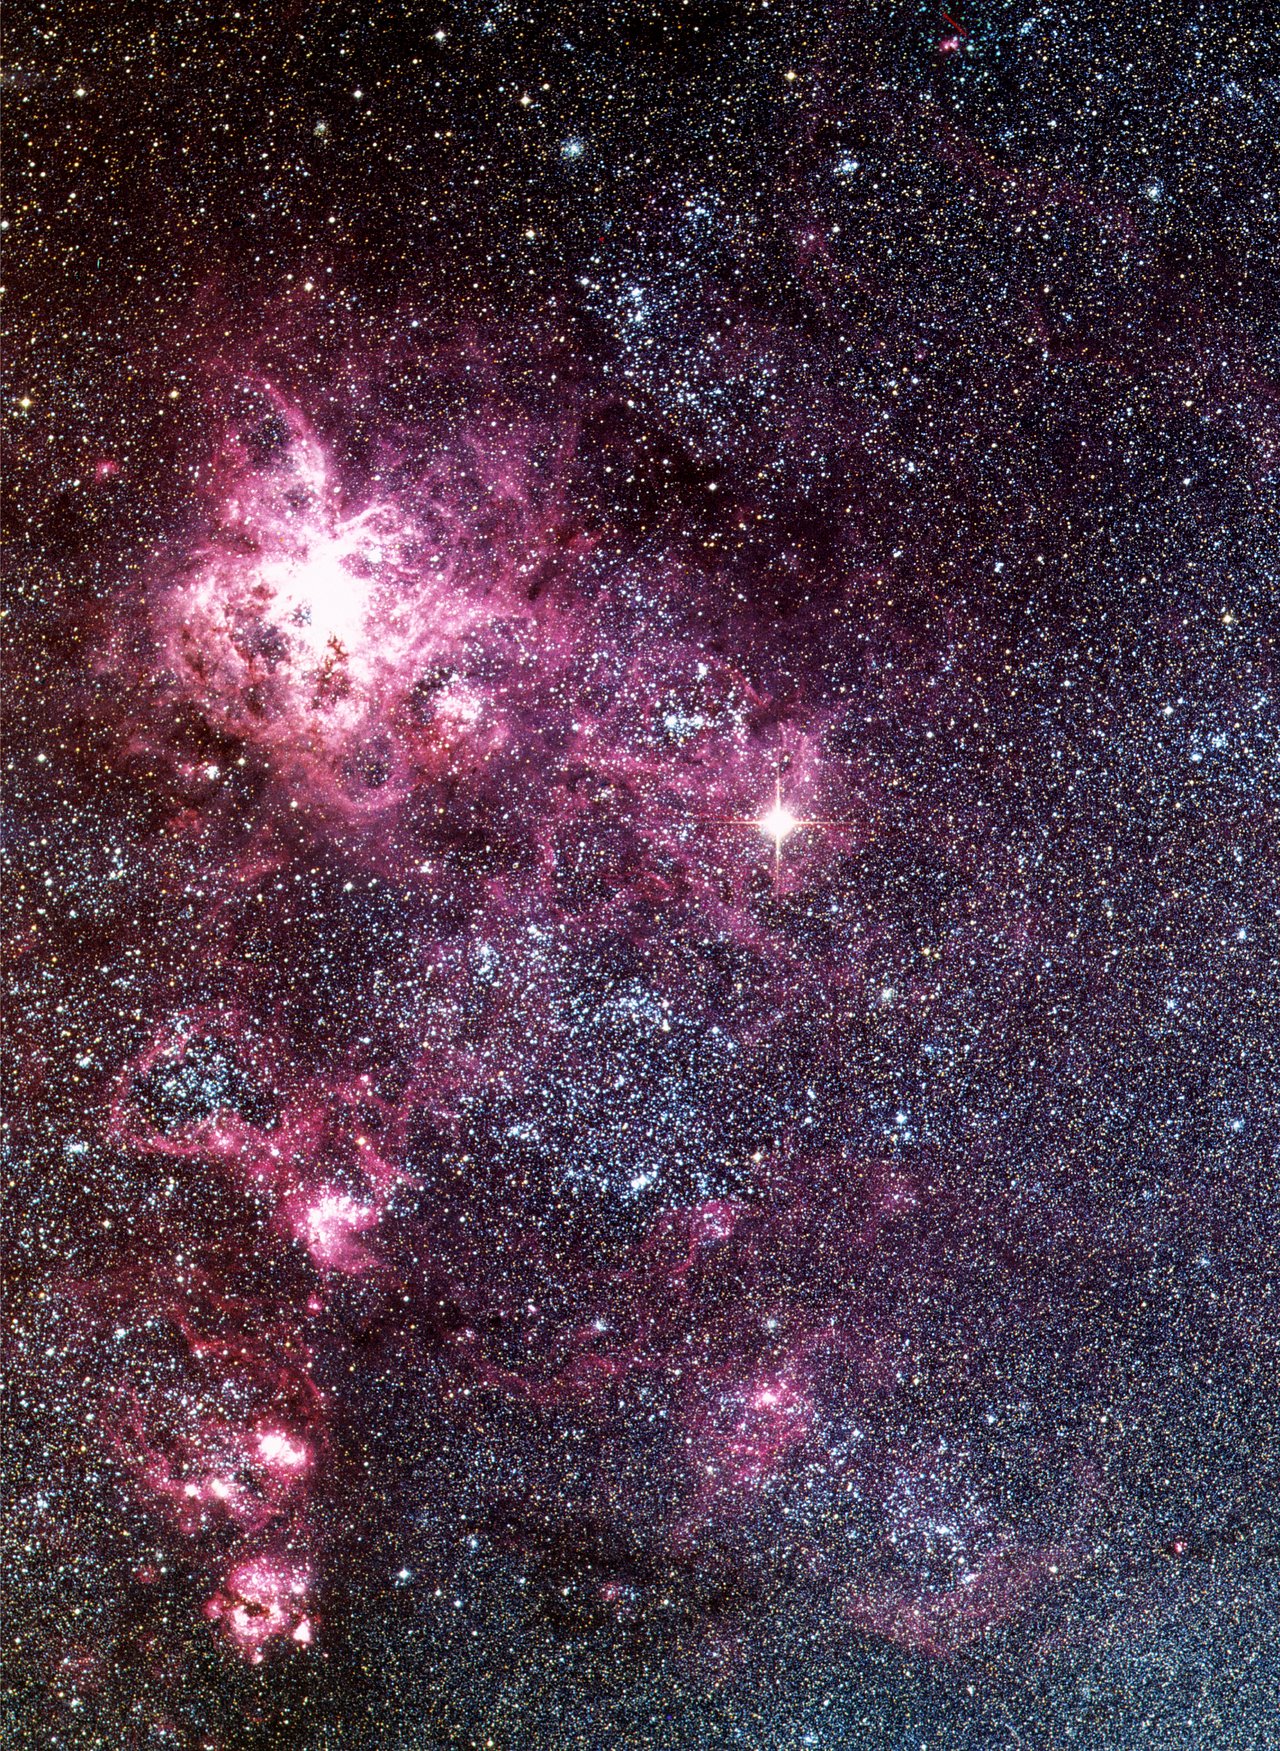 Is Betelgeuse About to Become a Supernova?